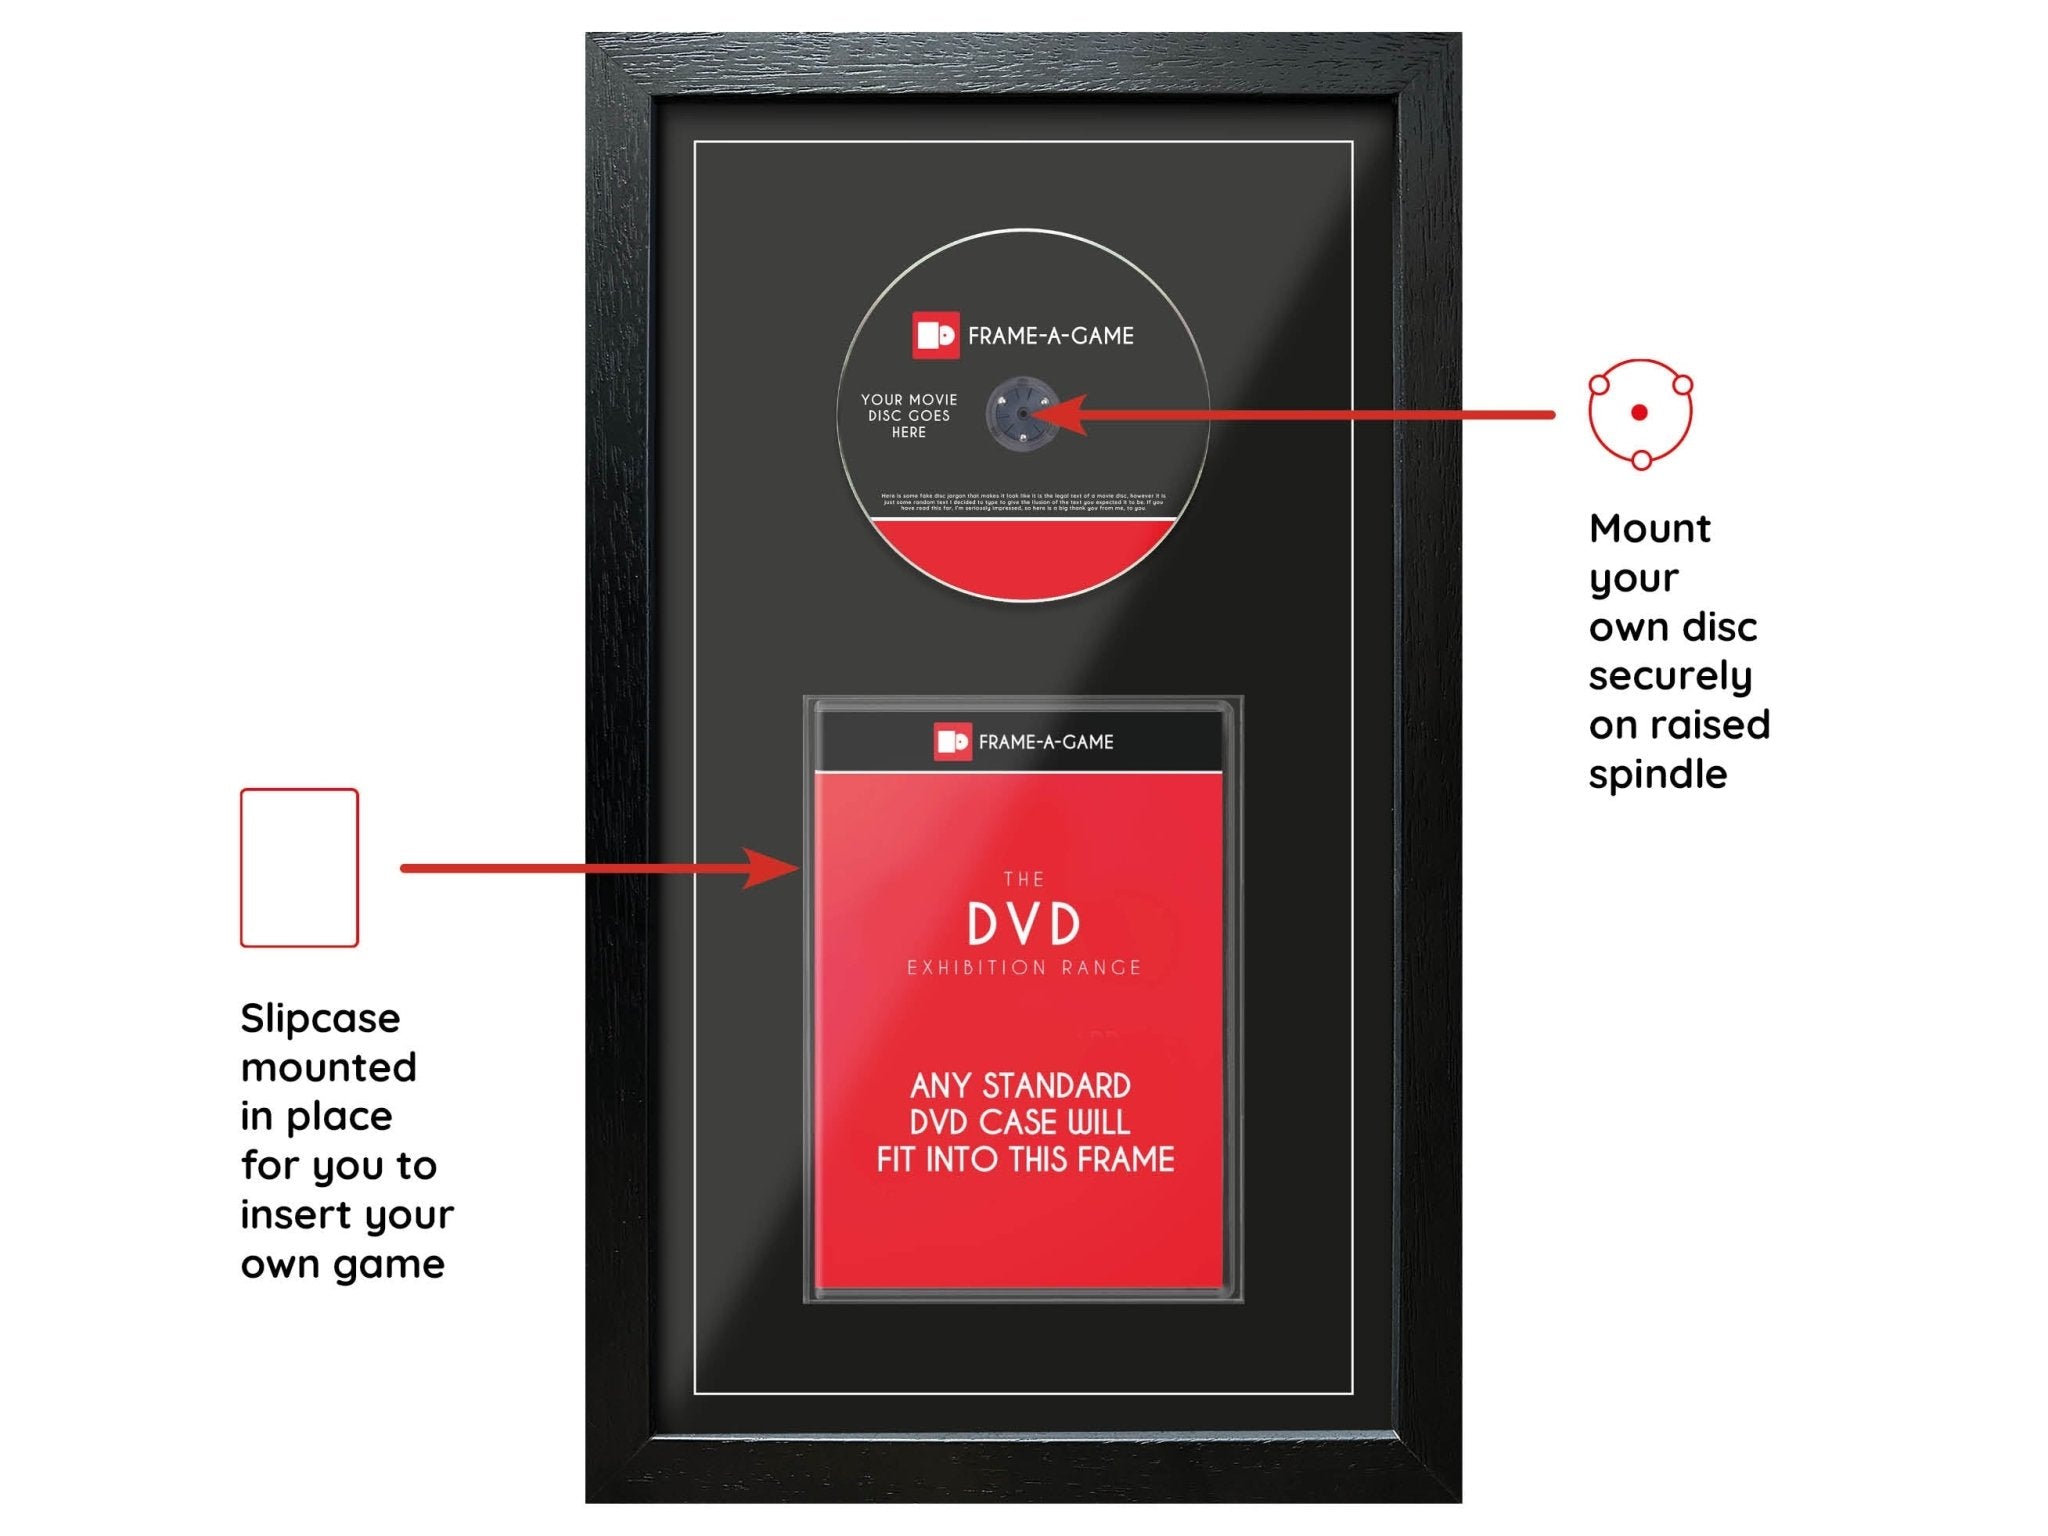 Use your own movie (DVD) Exhibition Range Frame - Frame-A-Game